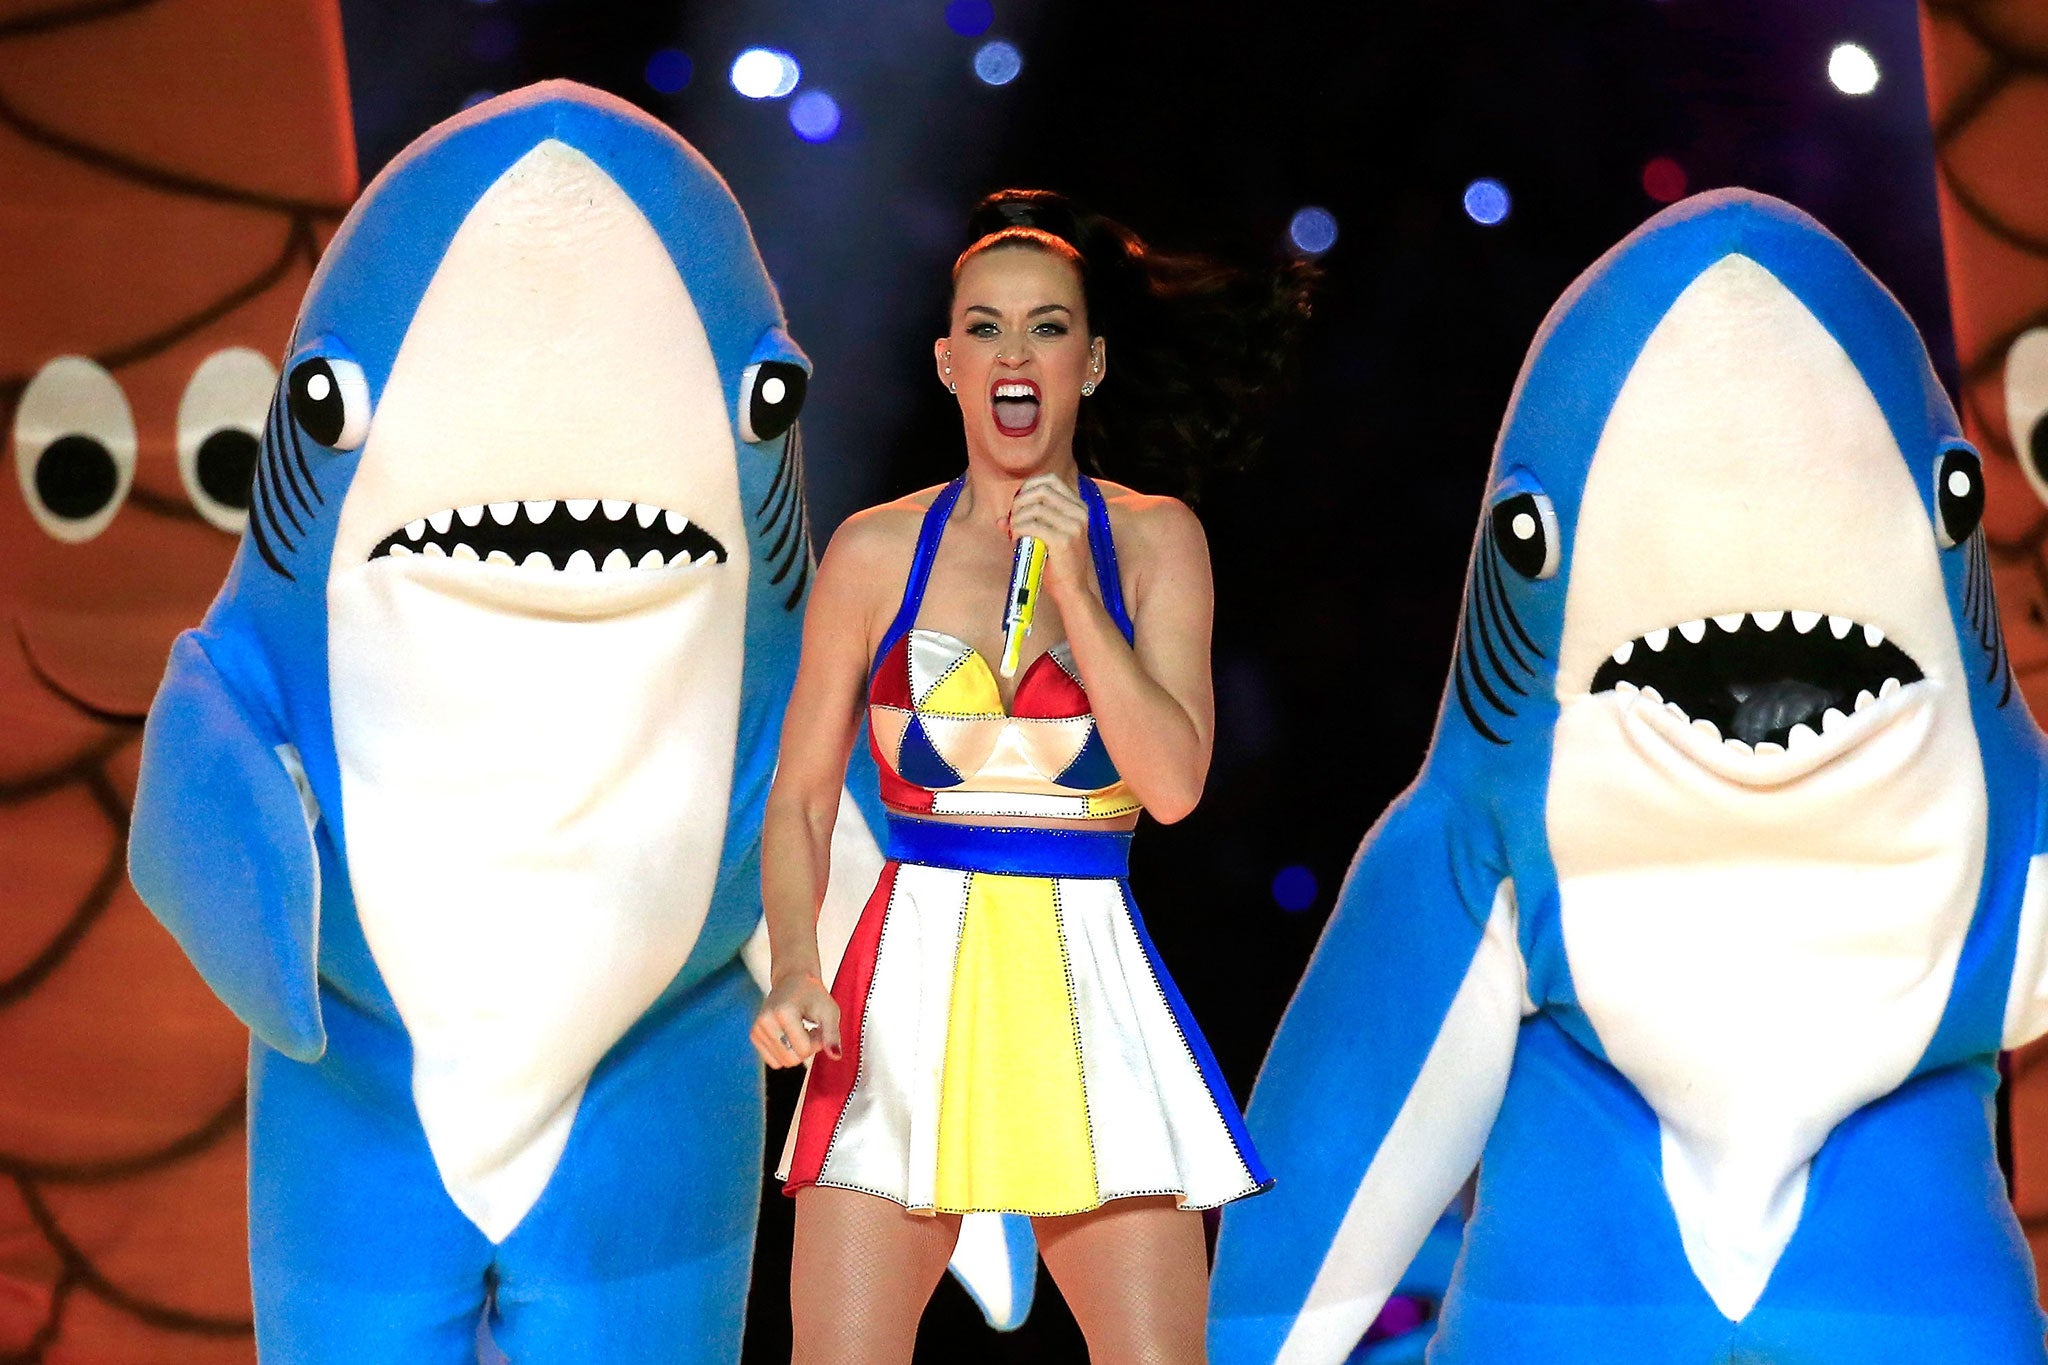 Katy Perry and her two sharks during the Super Bowl performance